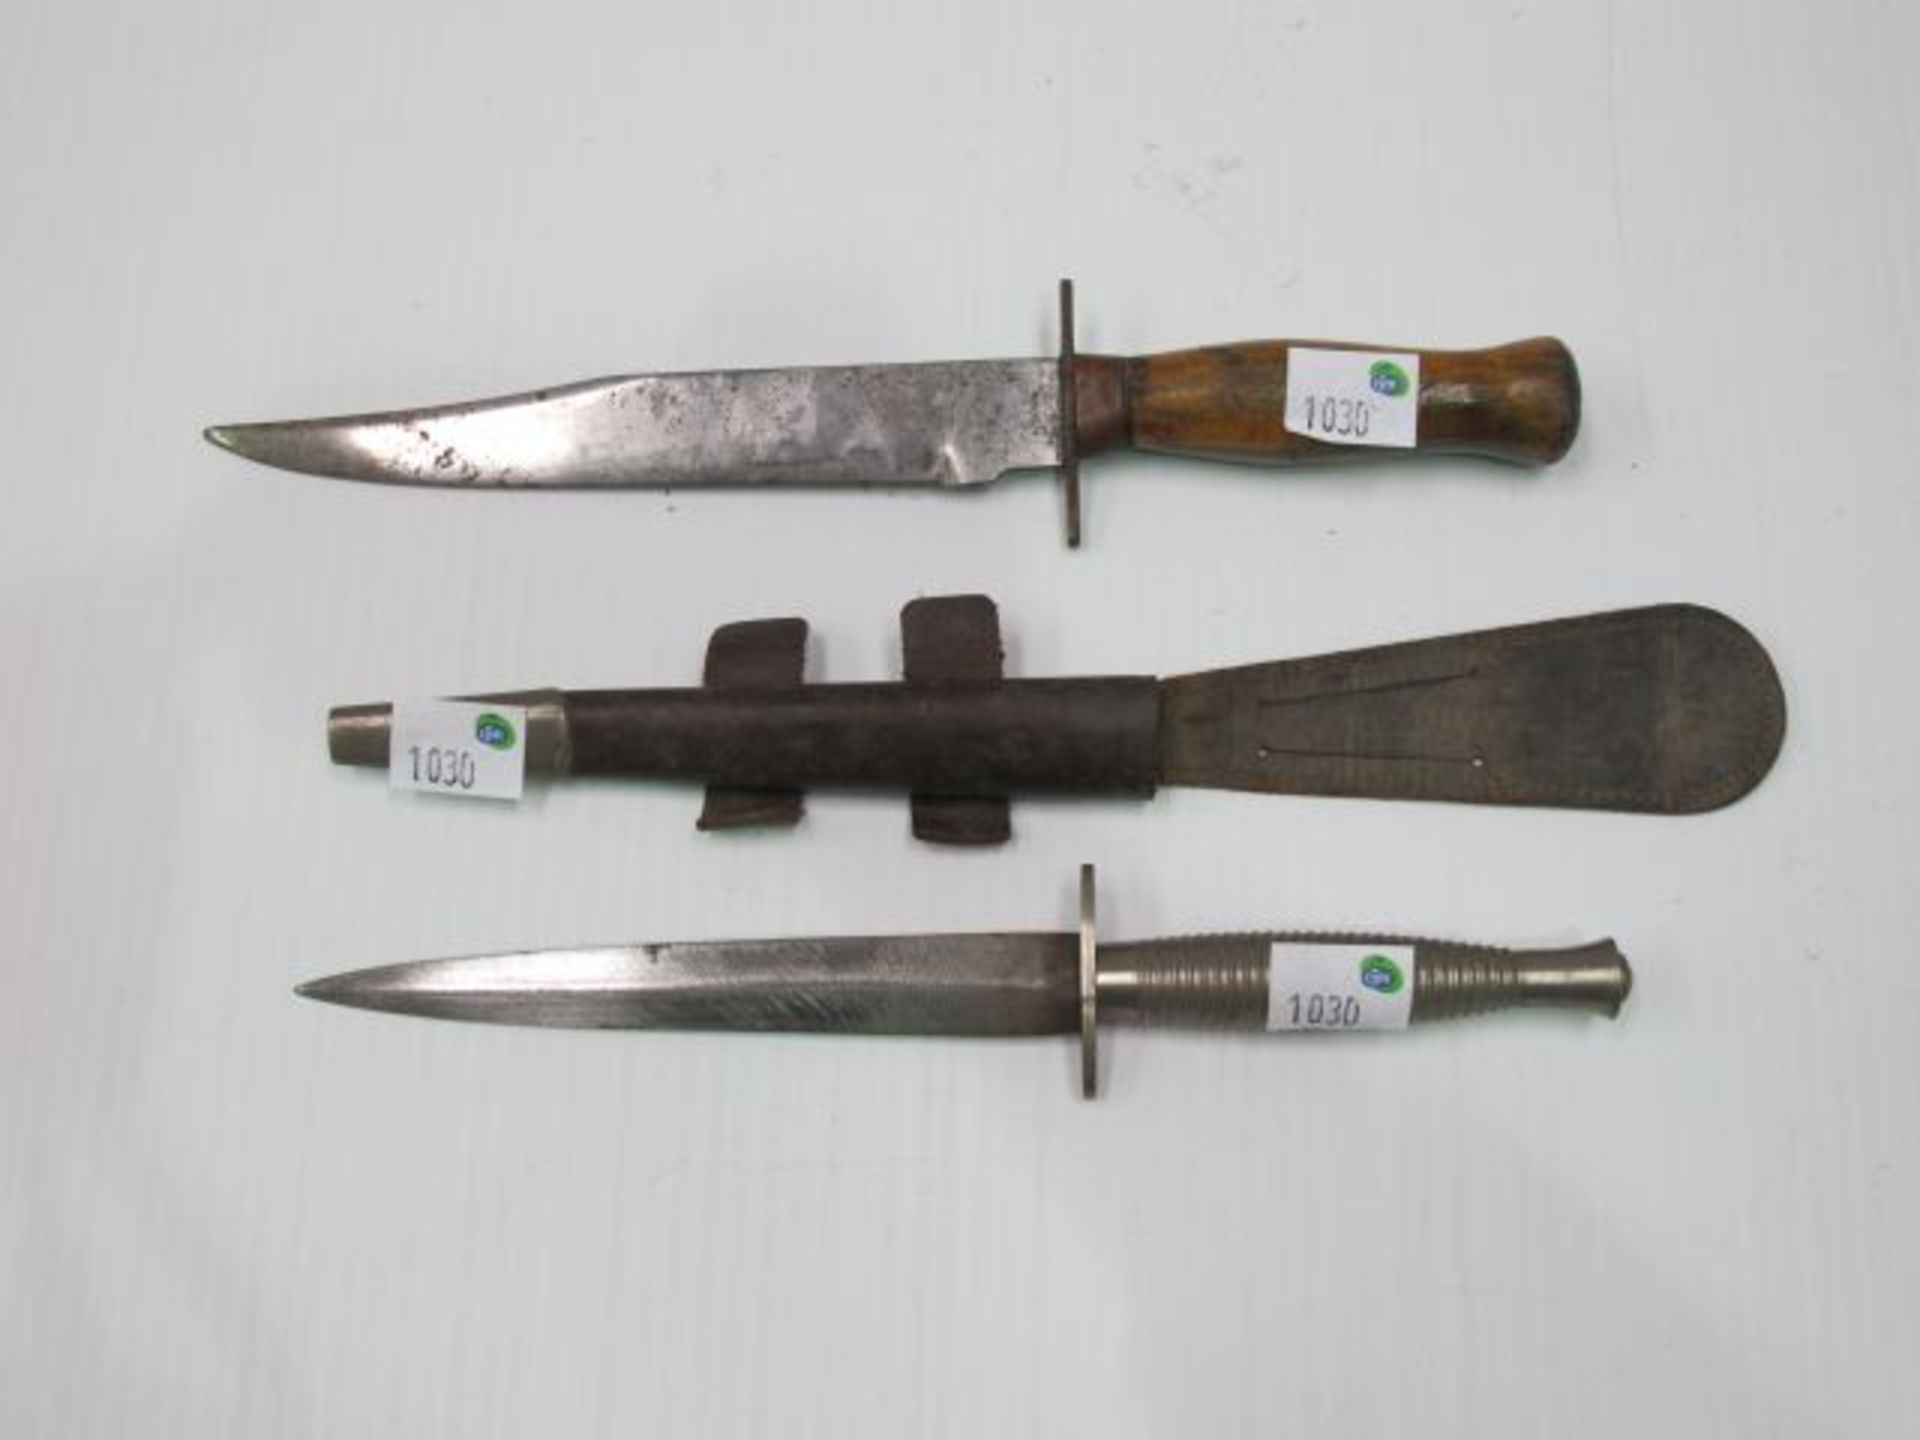 Two Dagger style Knives, one with Metal Tipped Scabbard. Length of blade and metal handle is 29. - Image 2 of 2